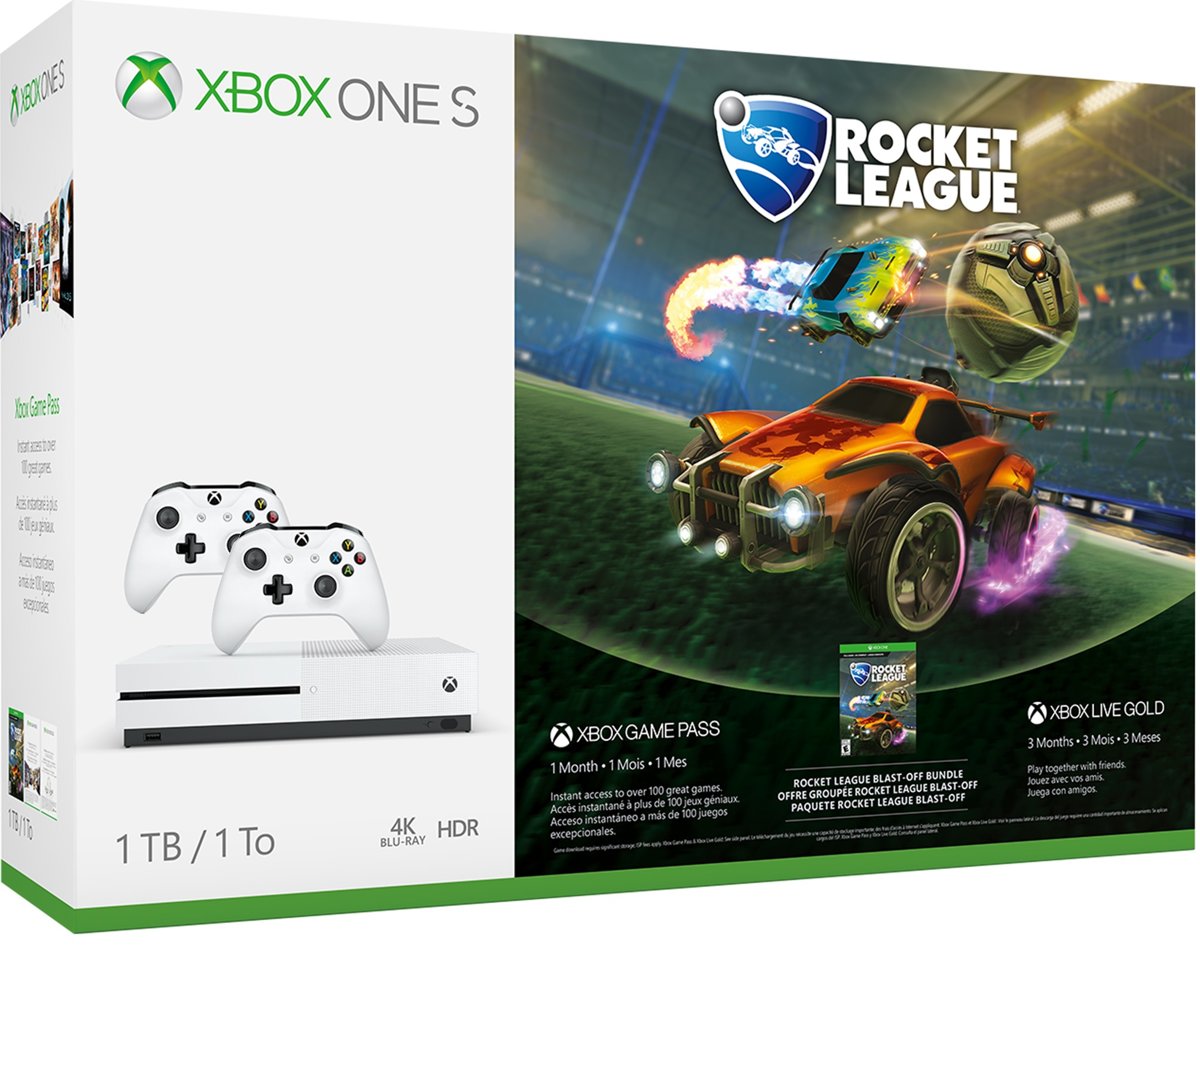 Xbox One S Console (1 TB) + 2 Controllers + Rocket League (Xbox One), Microsoft